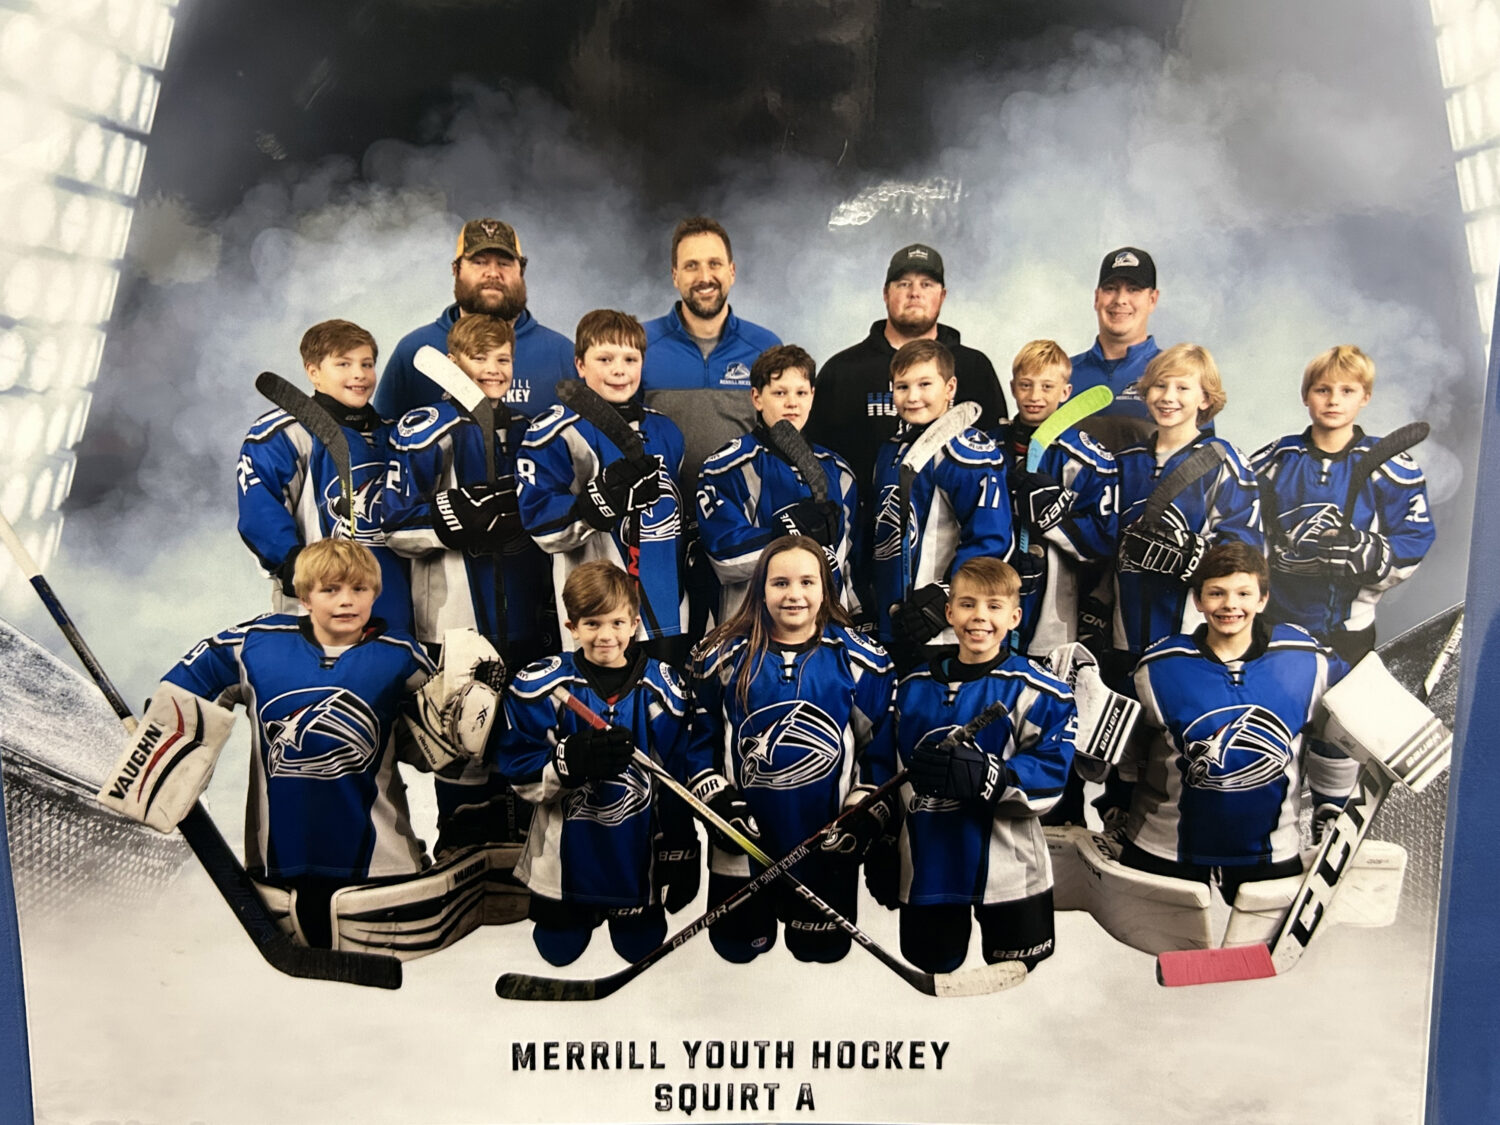 Merrill Youth Hockey Squirt A’s are headed to State